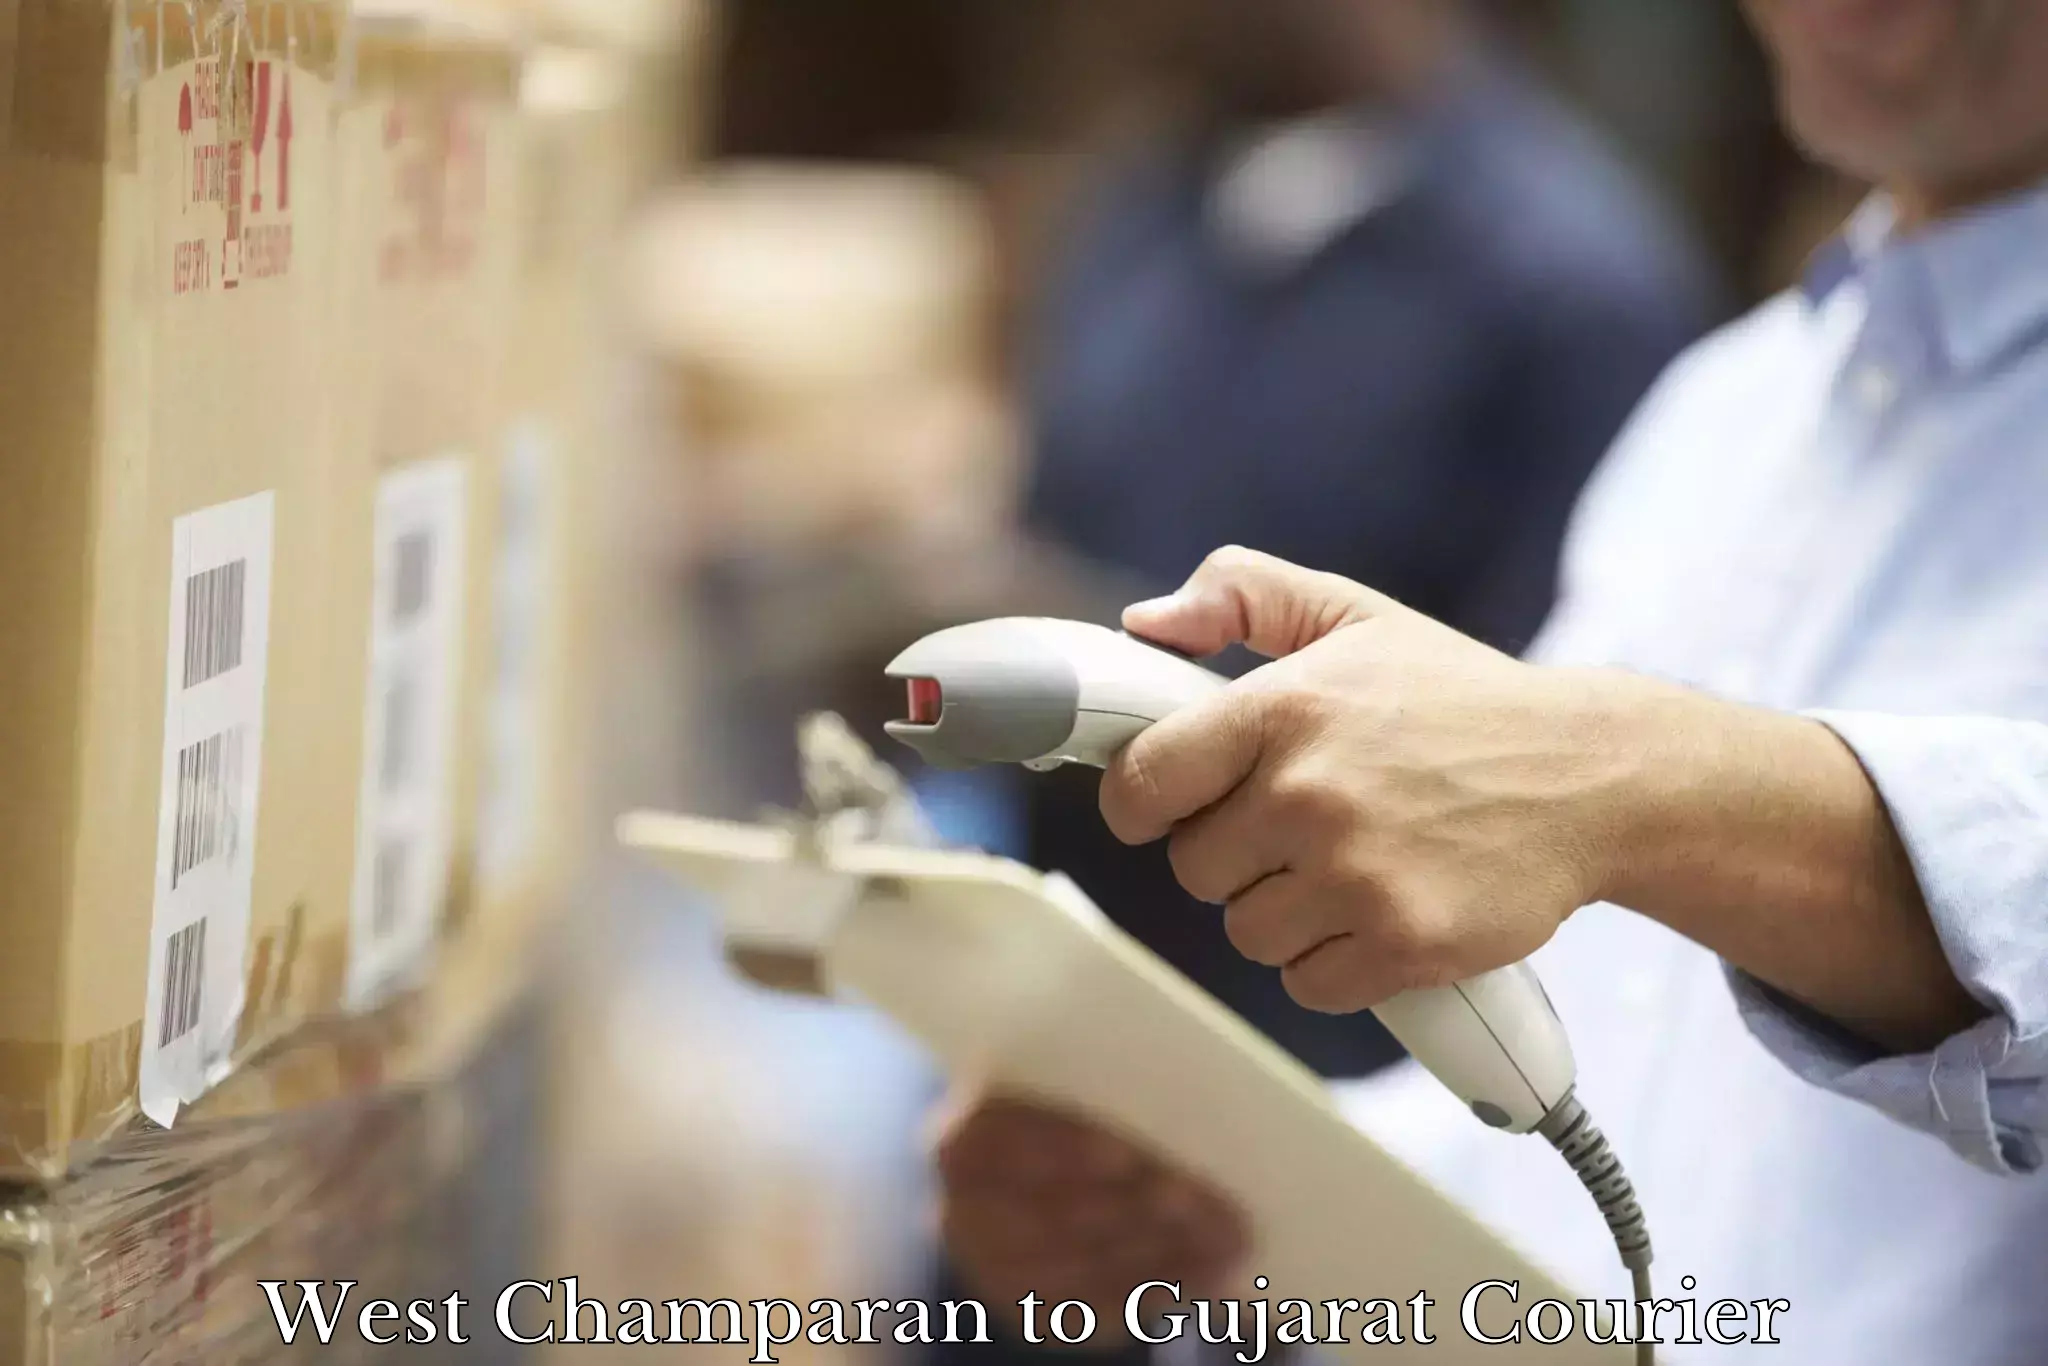 Quality courier partnerships in West Champaran to Ahmedabad